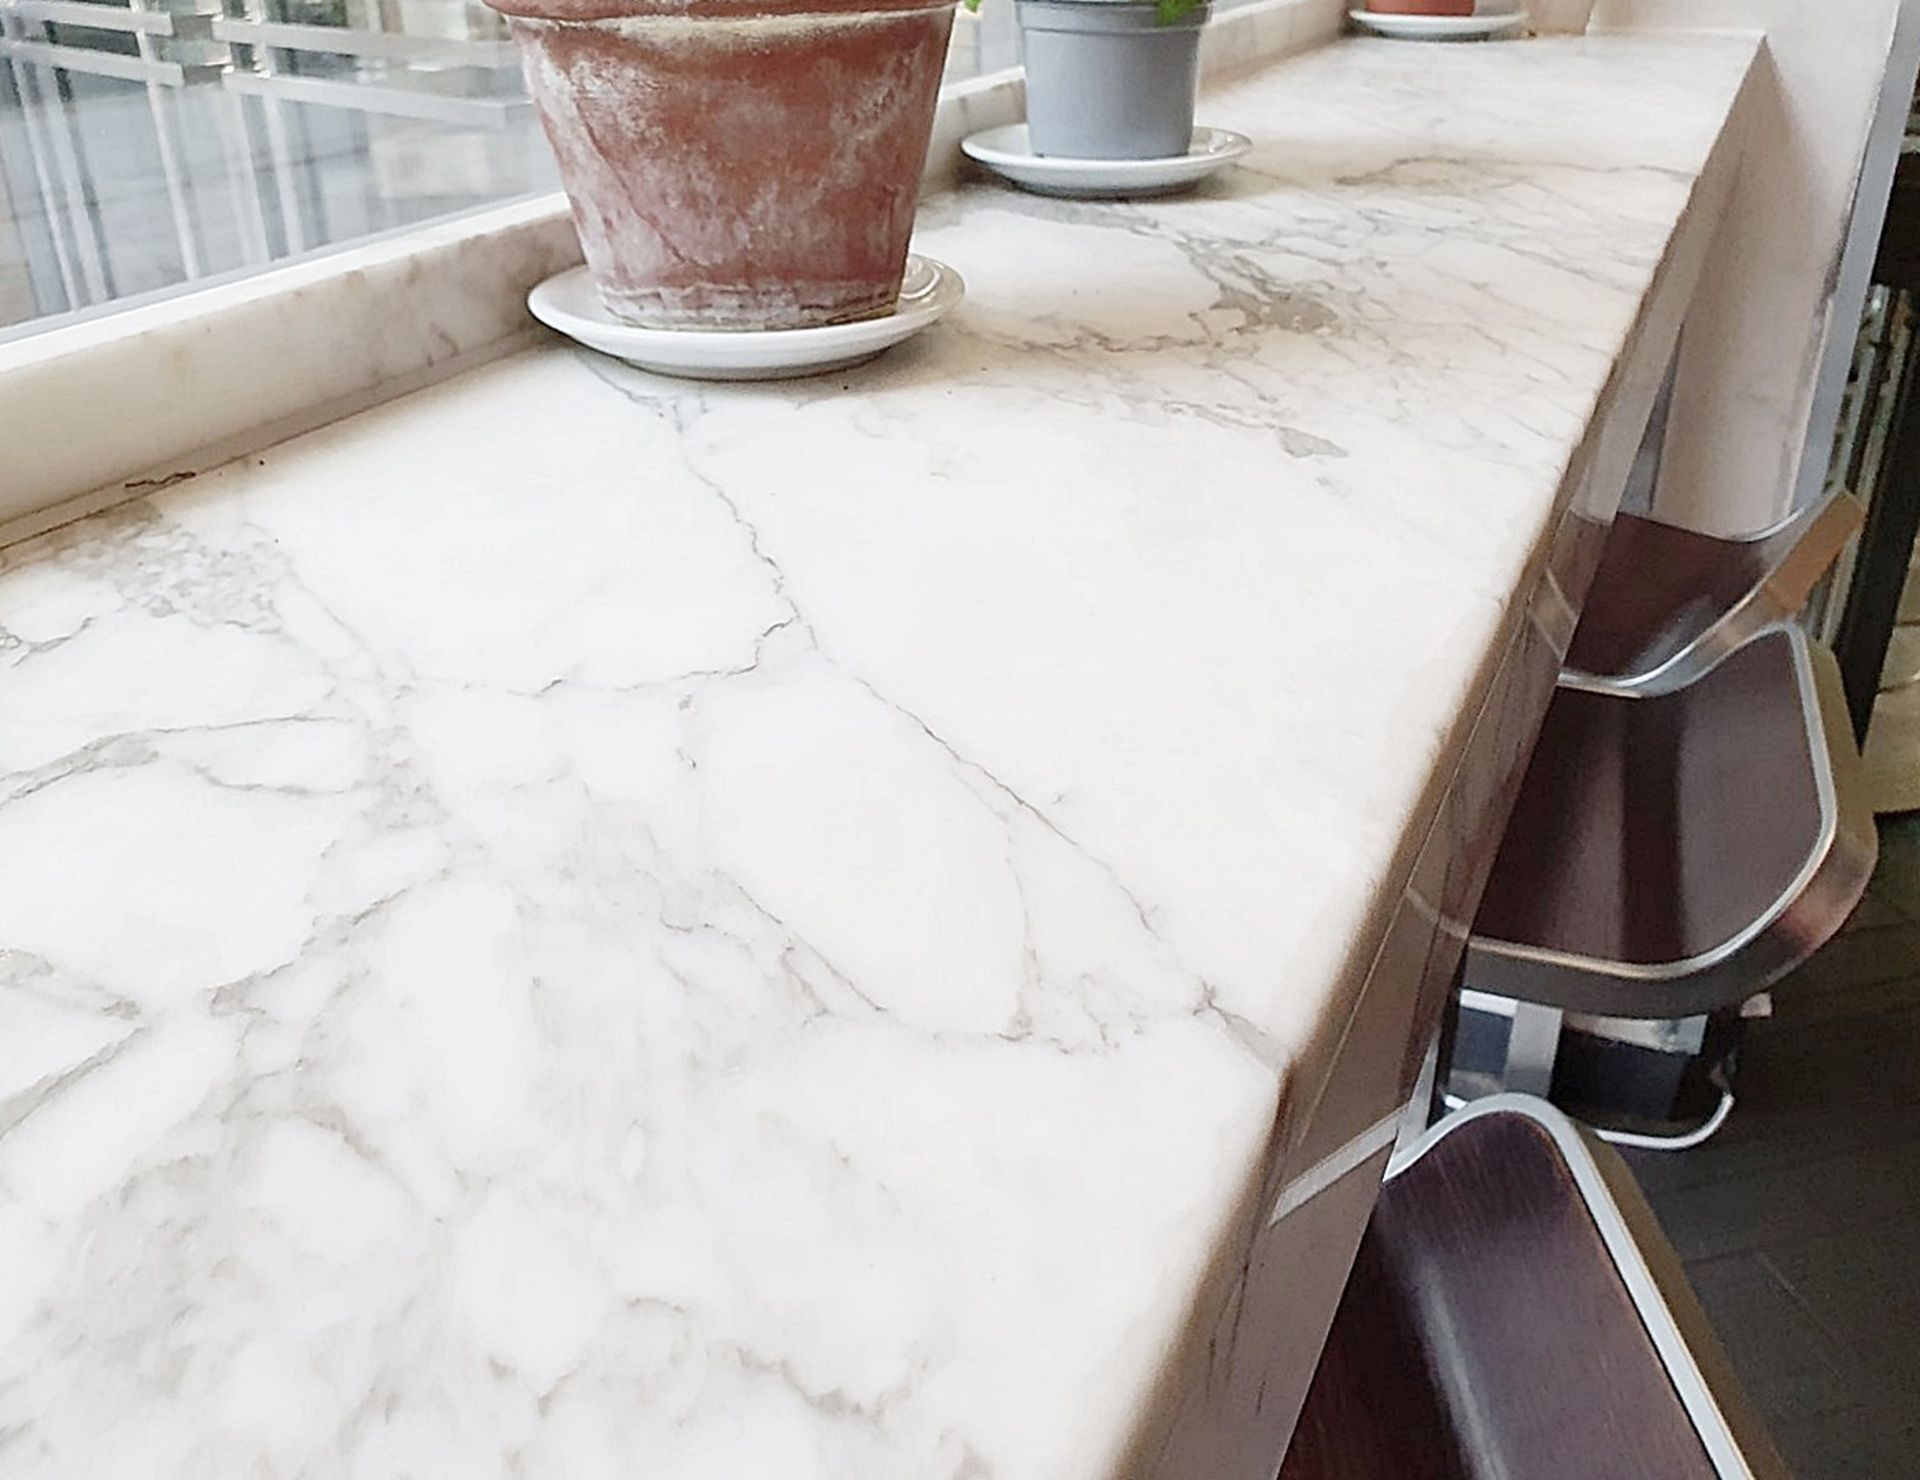 1 x White Marble/Granite Breakfast / Coffee Bar - Two Piece - Ref: BRE016 - CL421 - From A Milan- - Image 4 of 7